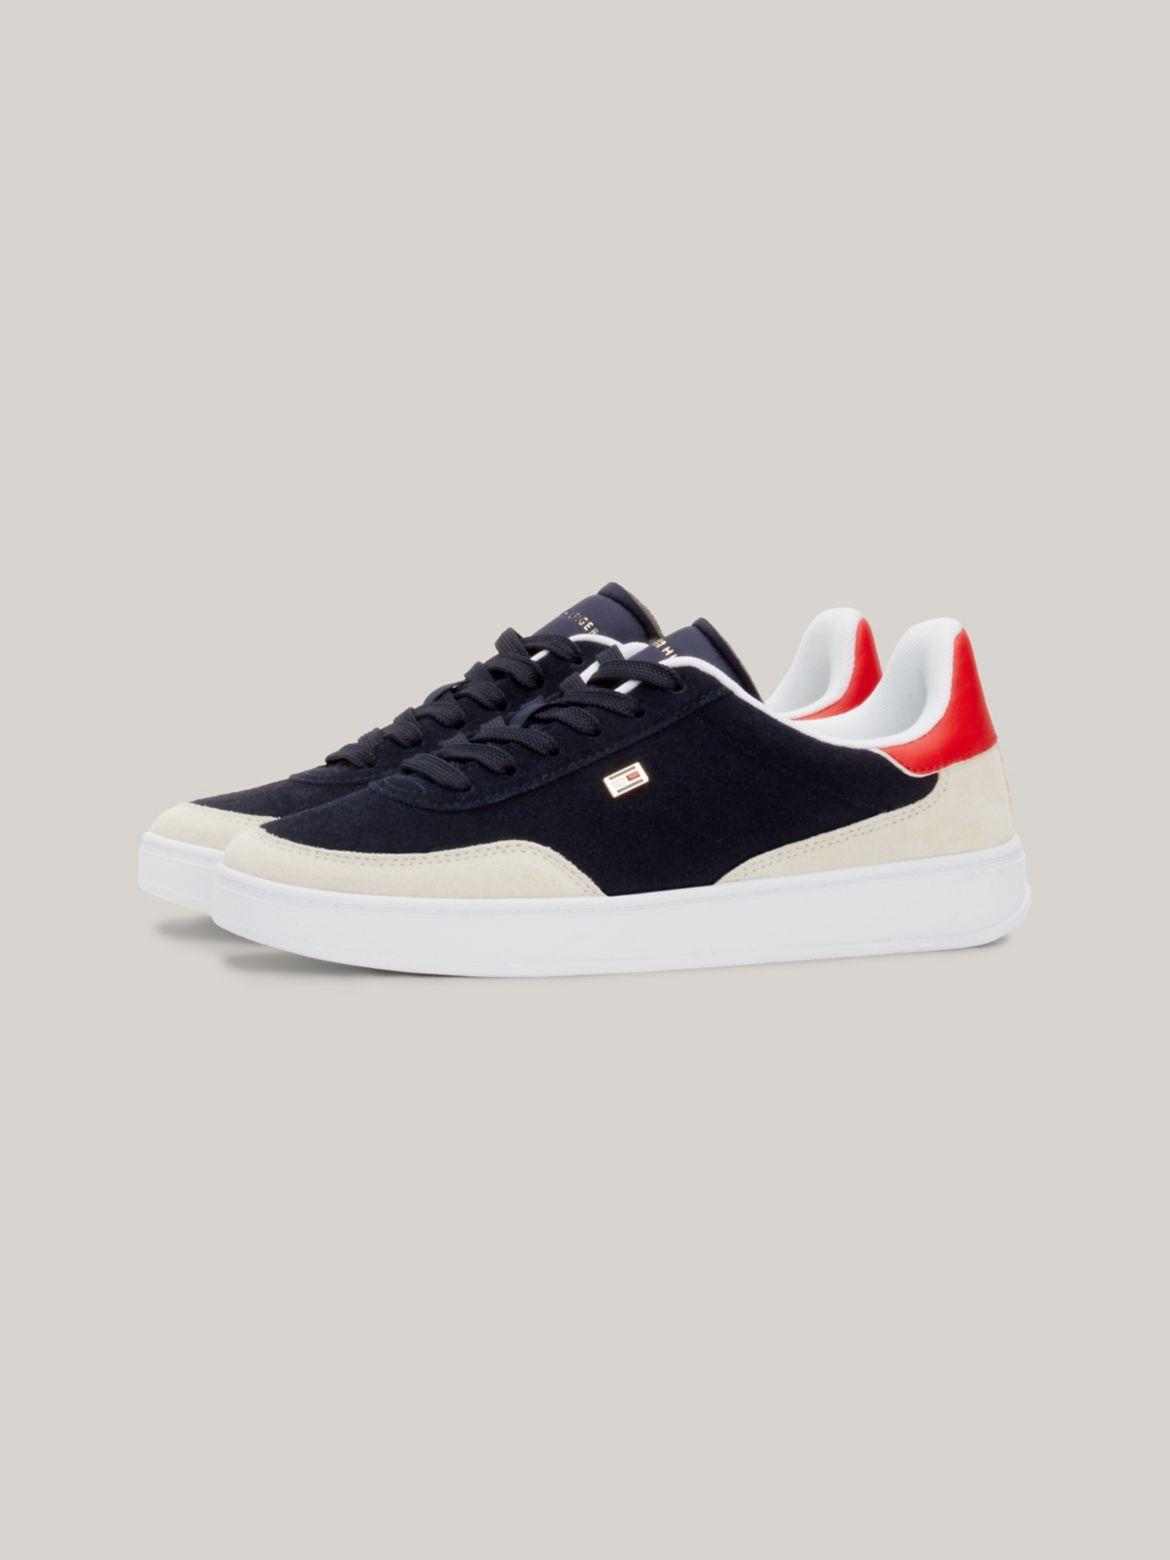 Tommy Hilfiger Women's Suede Cupsole Sneaker Product Image